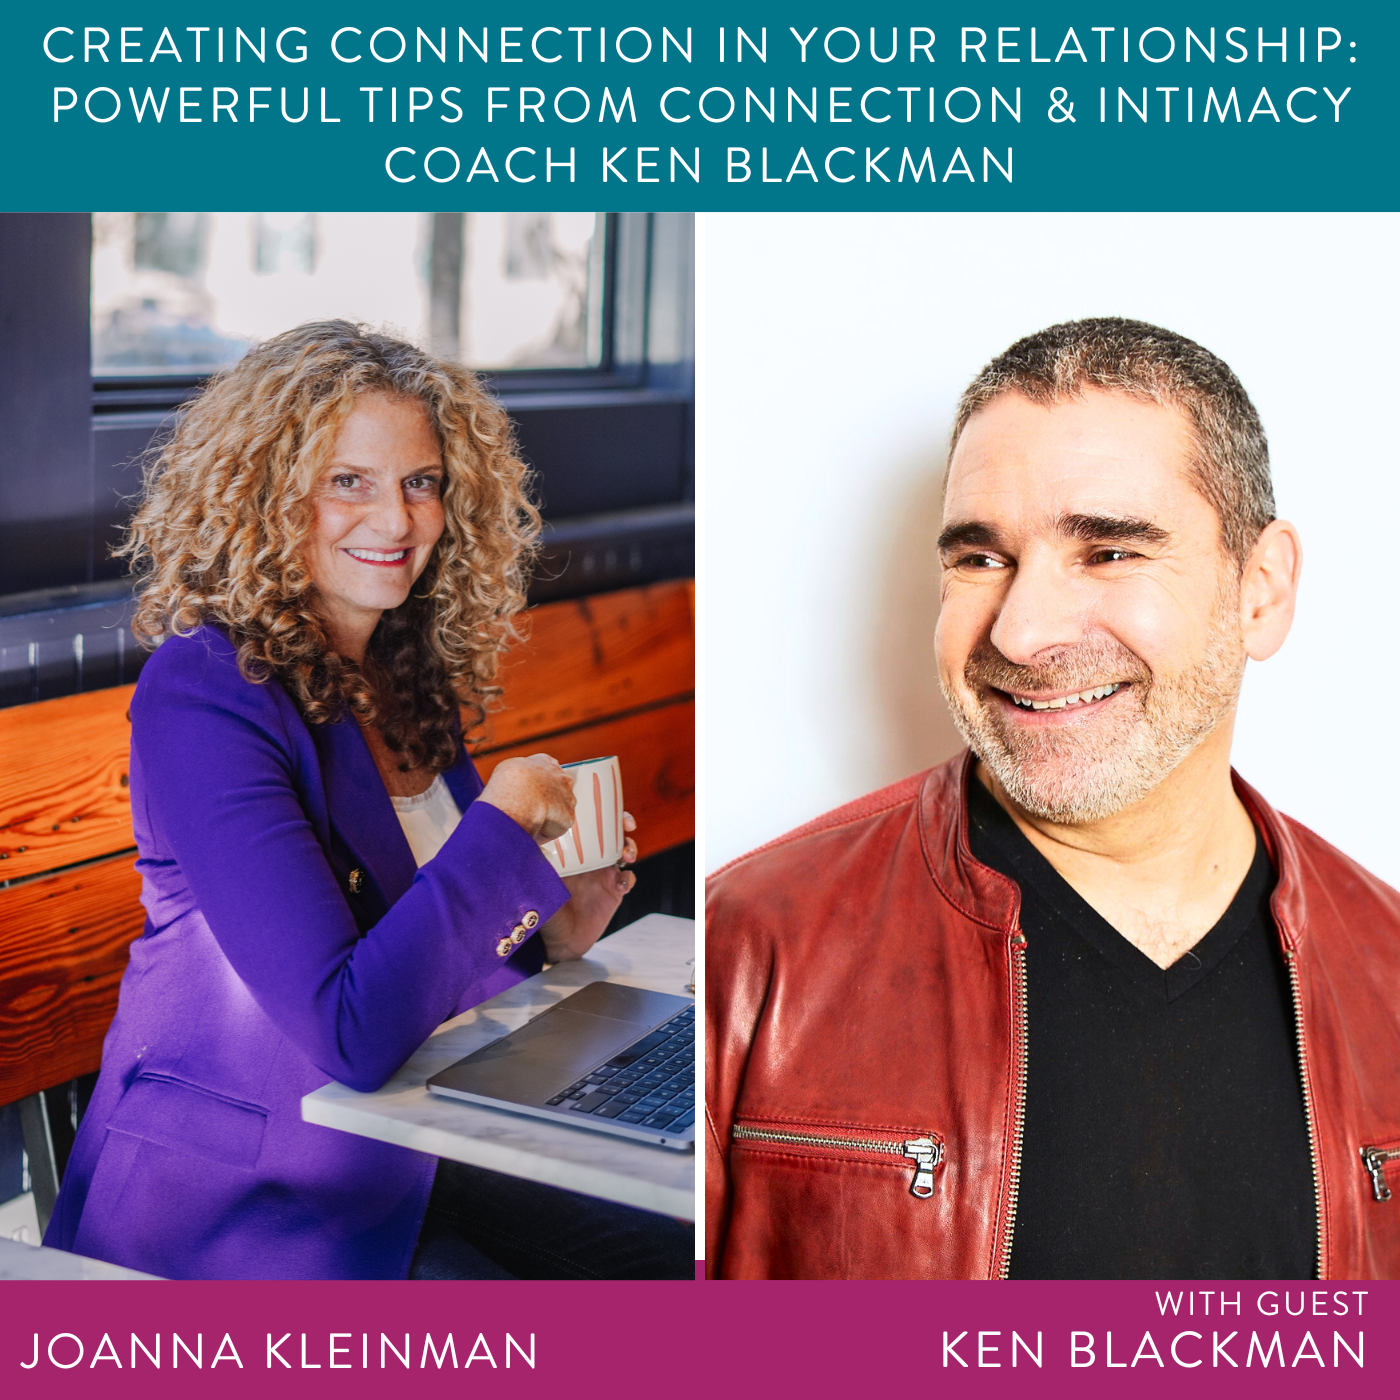 Creating connection in your relationship: Powerful Tips from Connection & Intimacy Coach Ken Blackman